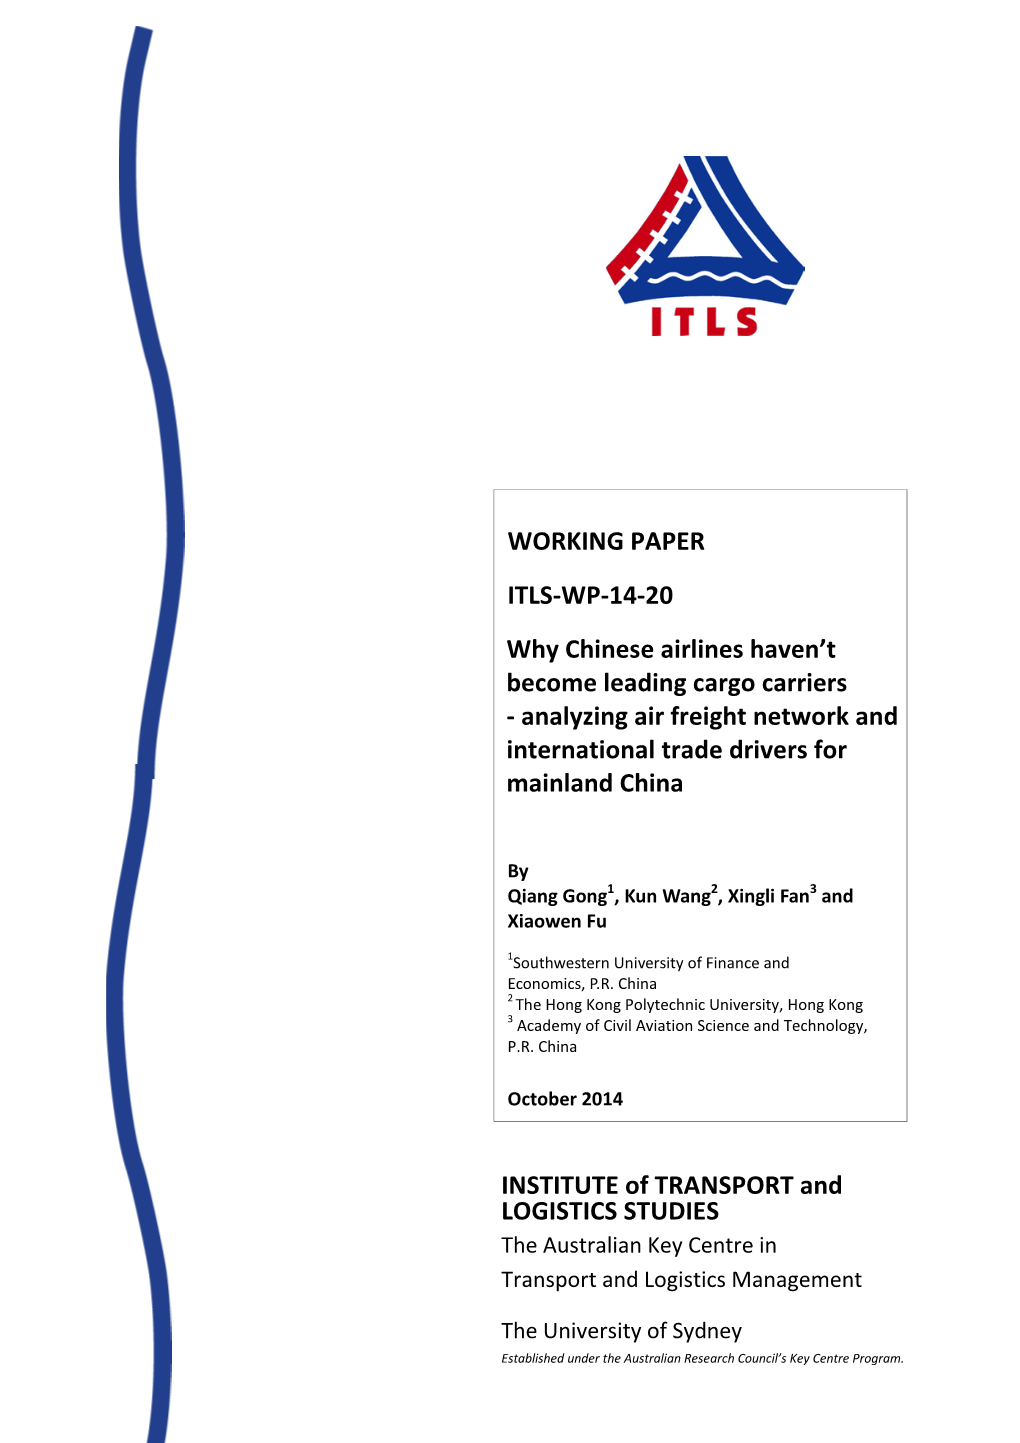 WORKING PAPER ITLS-WP-14-20 Why Chinese Airlines Haven't